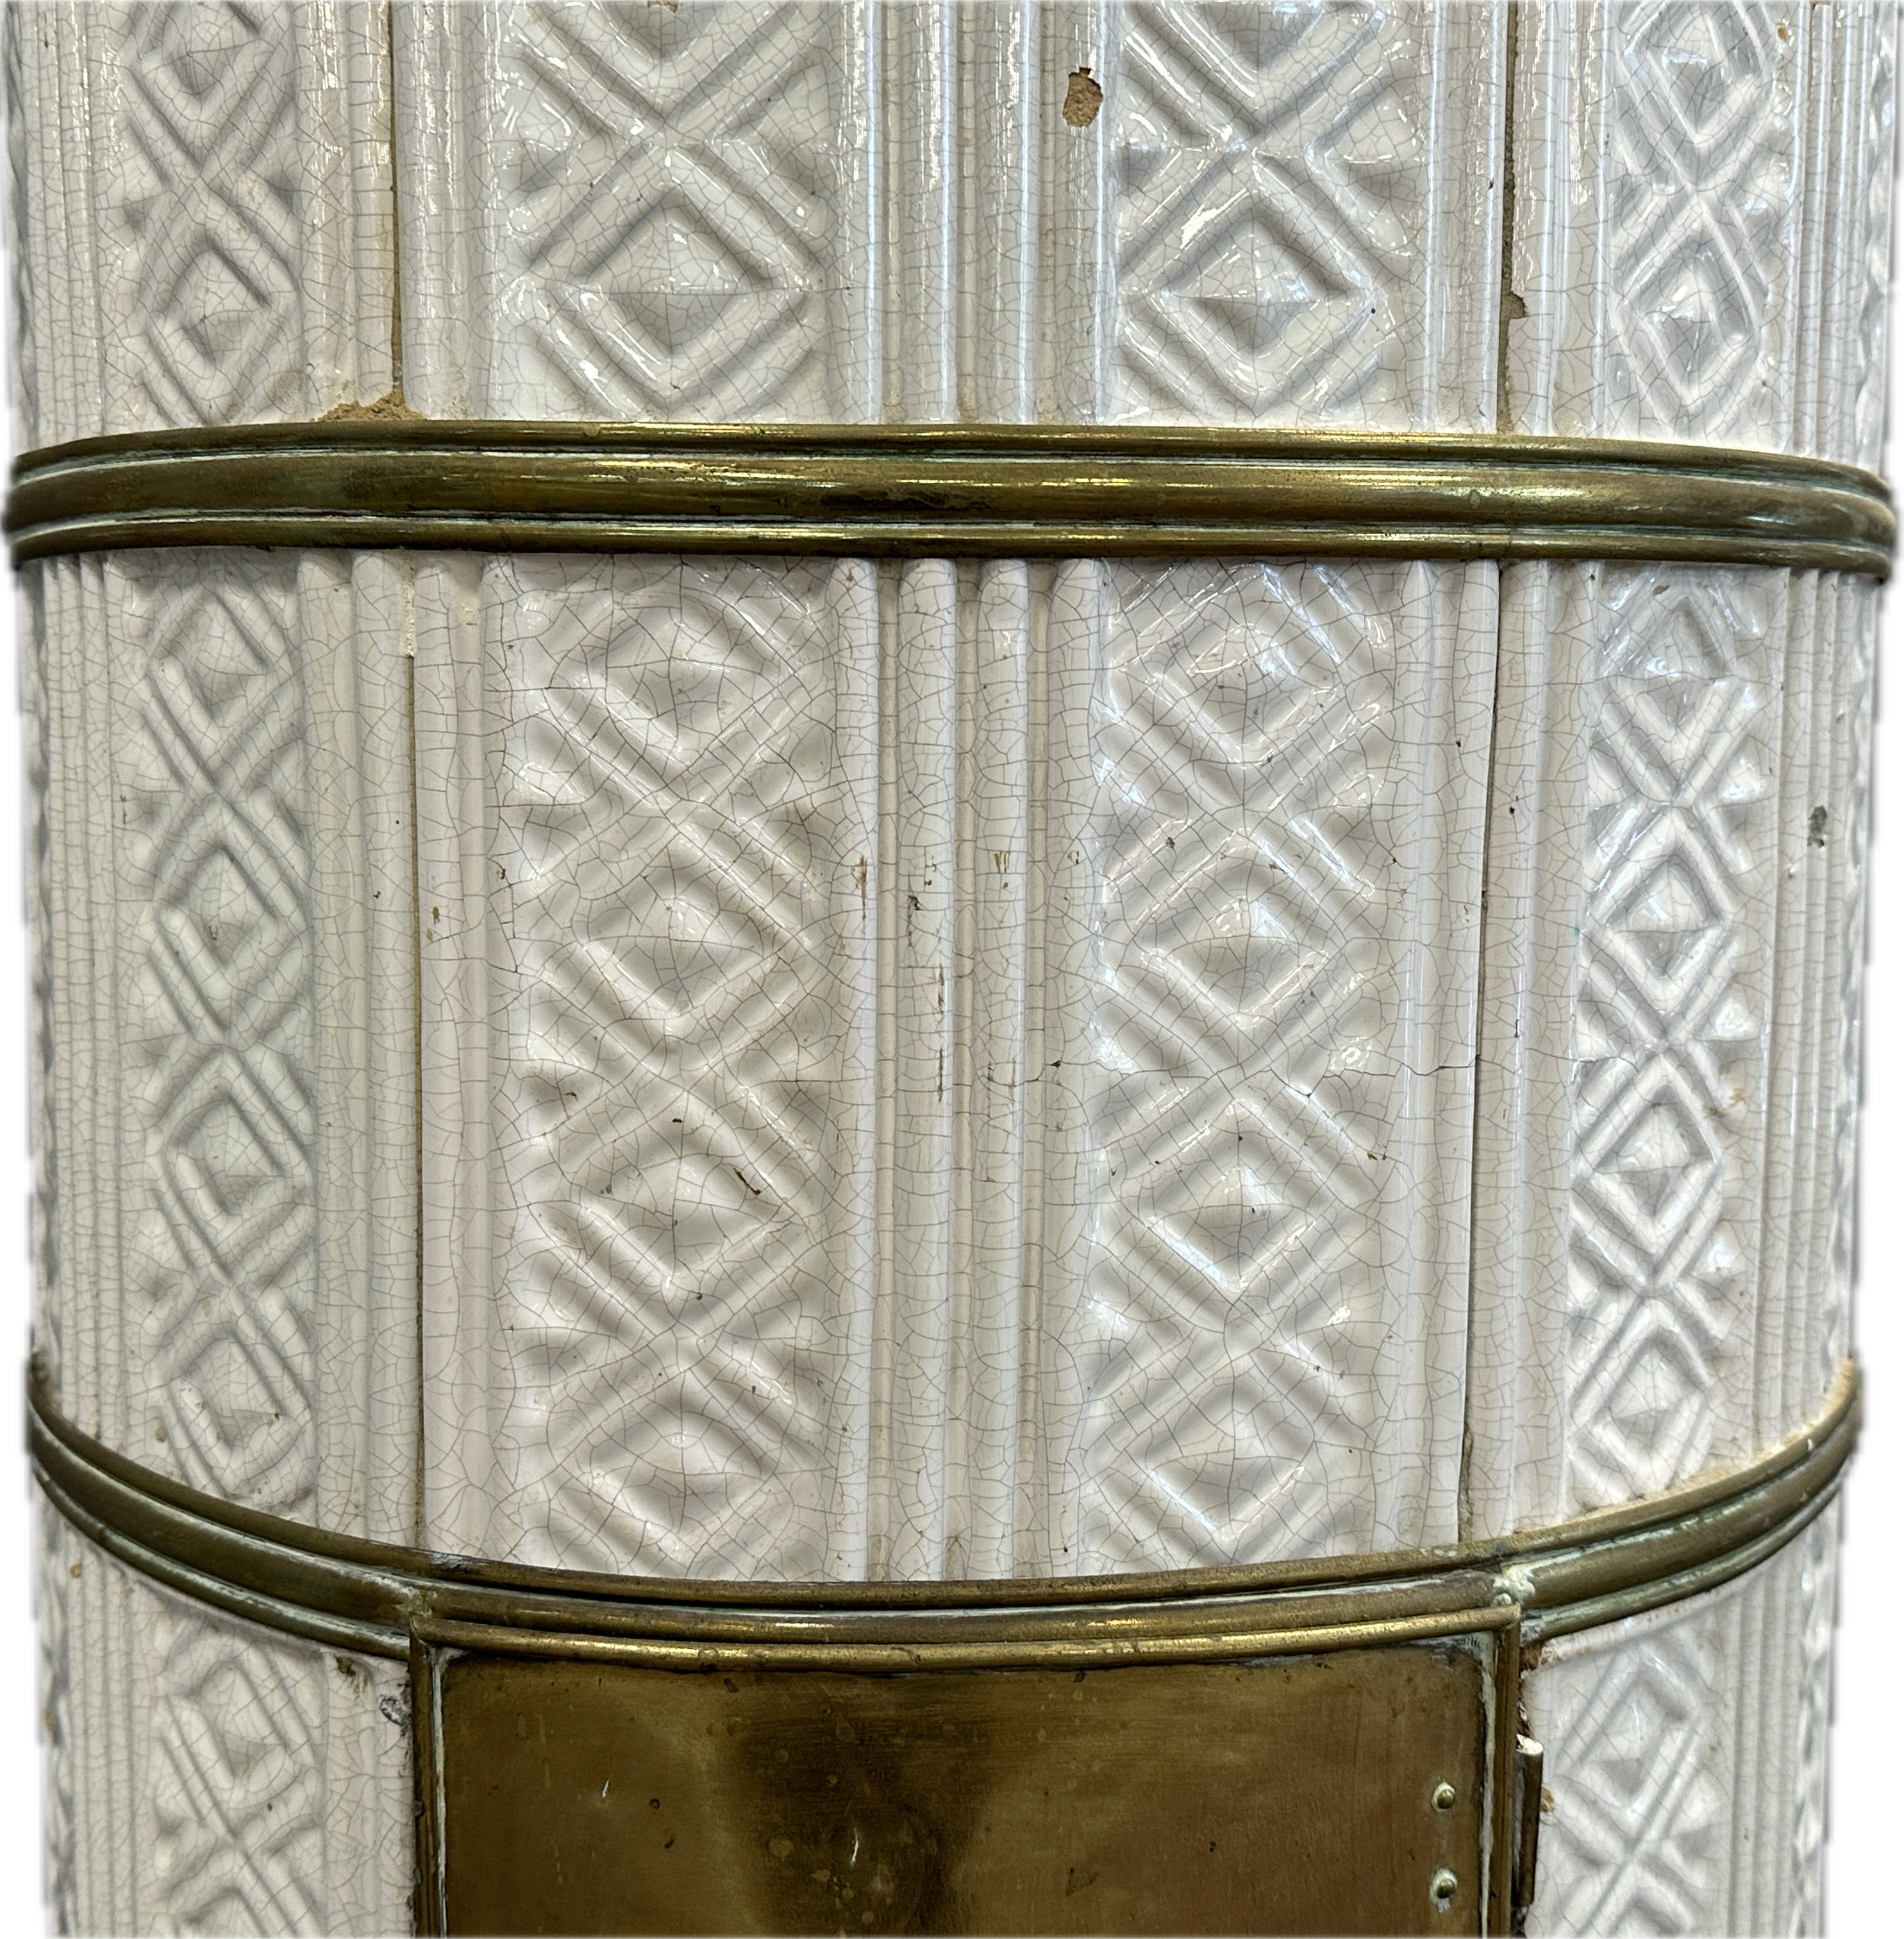 White Biedermeier round stove with tiles in relief structure. - Image 7 of 19